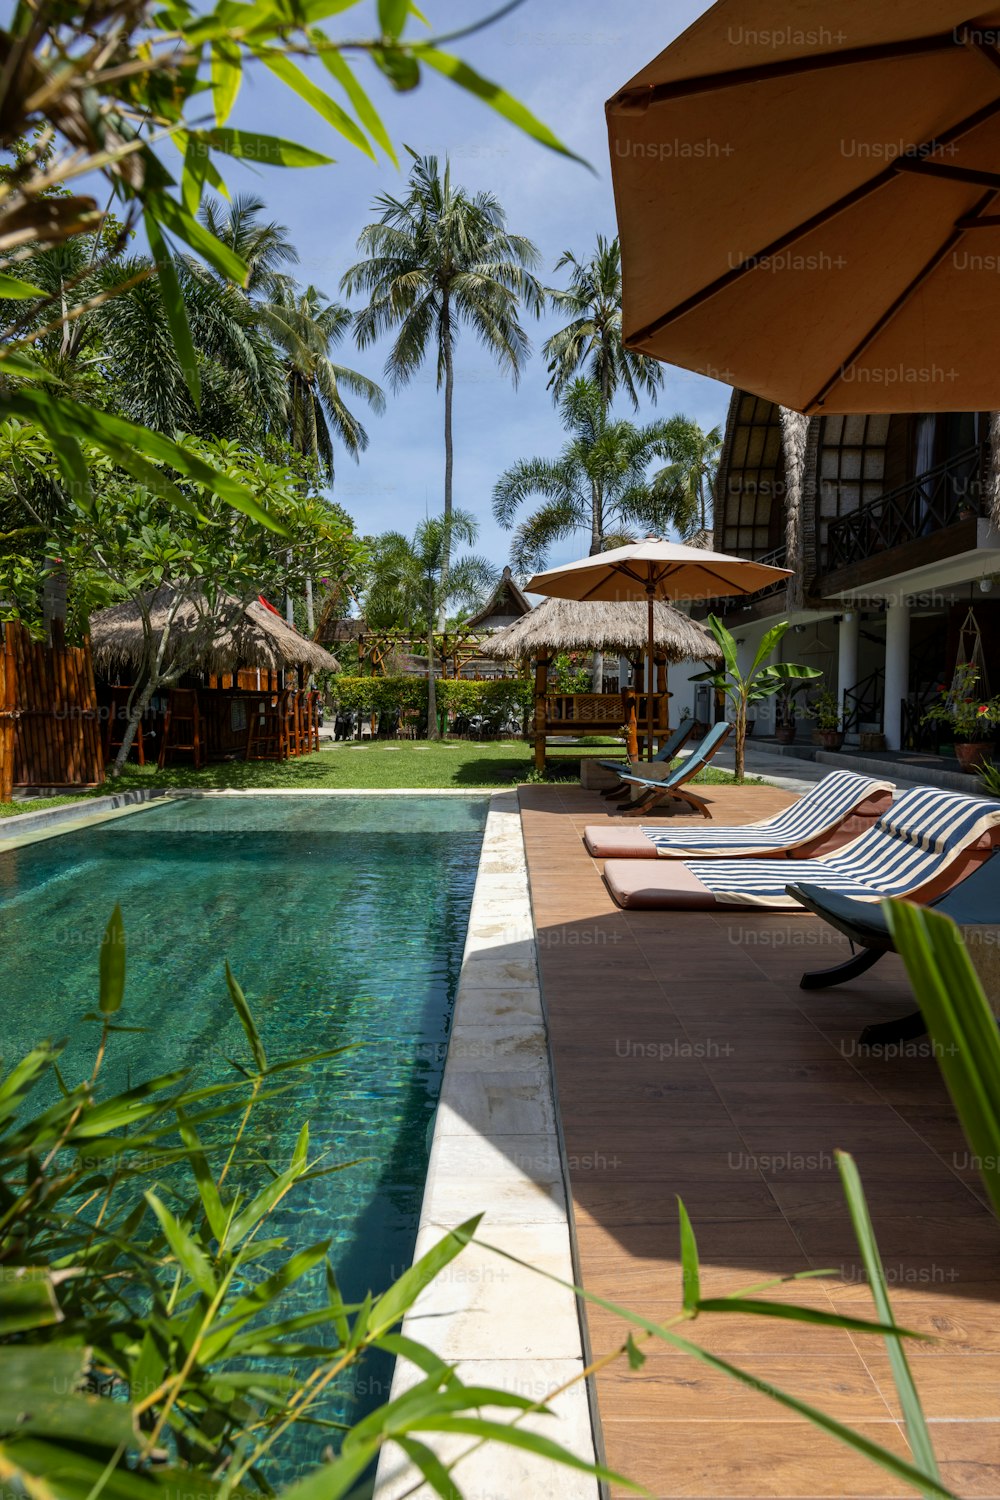 a pool with lounge chairs and umbrellas next to it